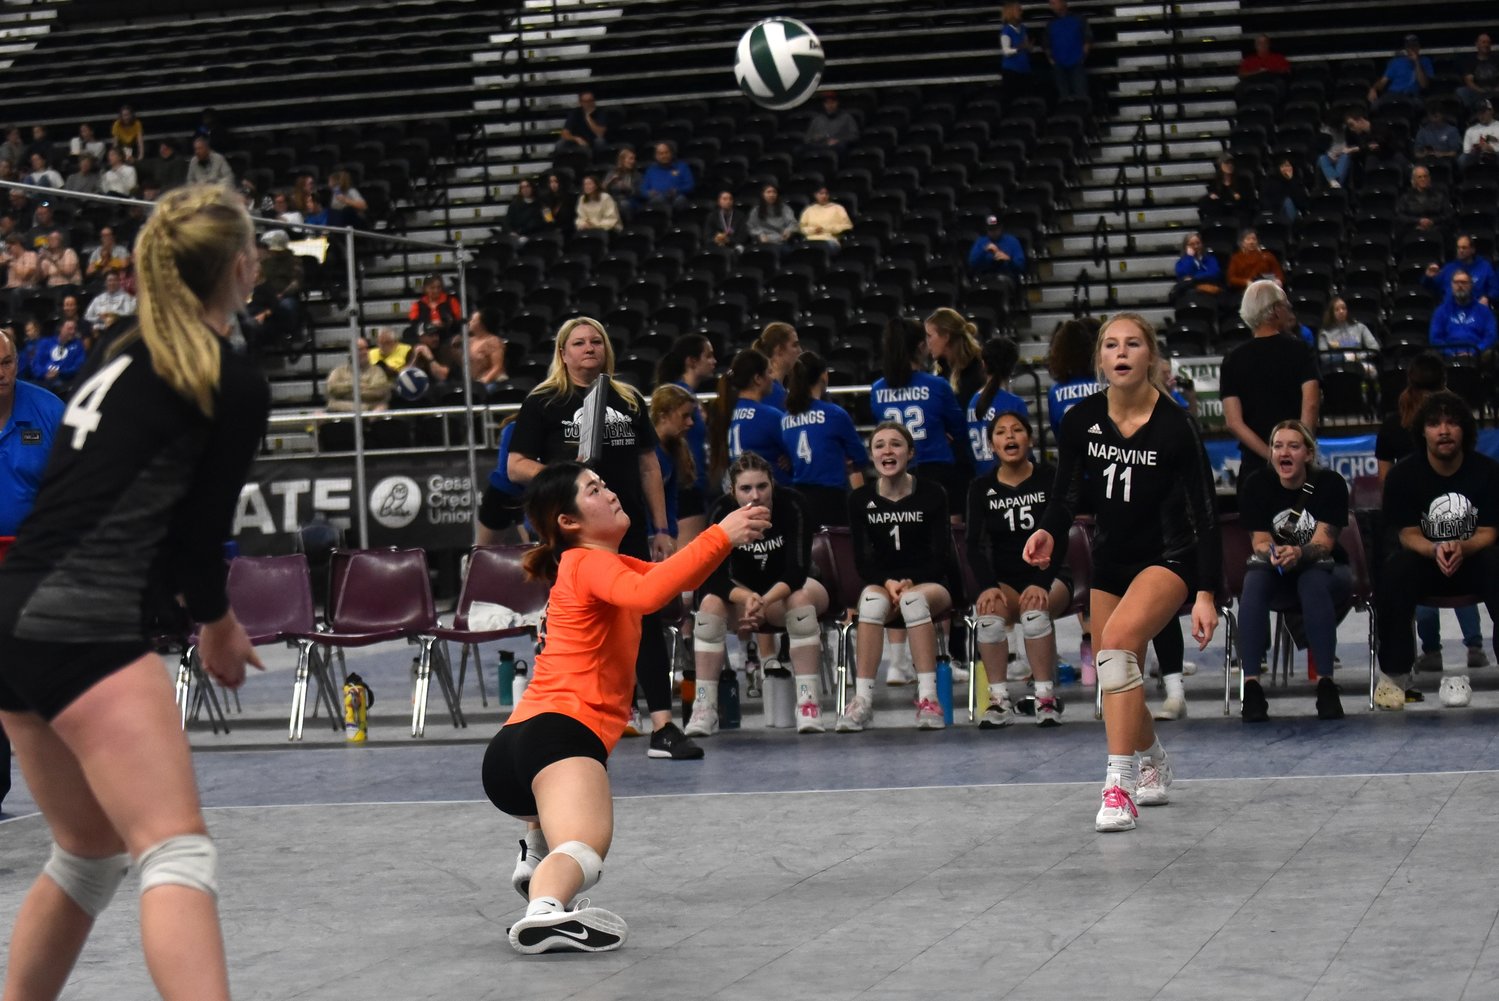 Emily Kang digs up a hard spike during Napavine's four-set loss to Toutle Lake in the first round of the 2B state tournament in Yakima on Nov. 10.